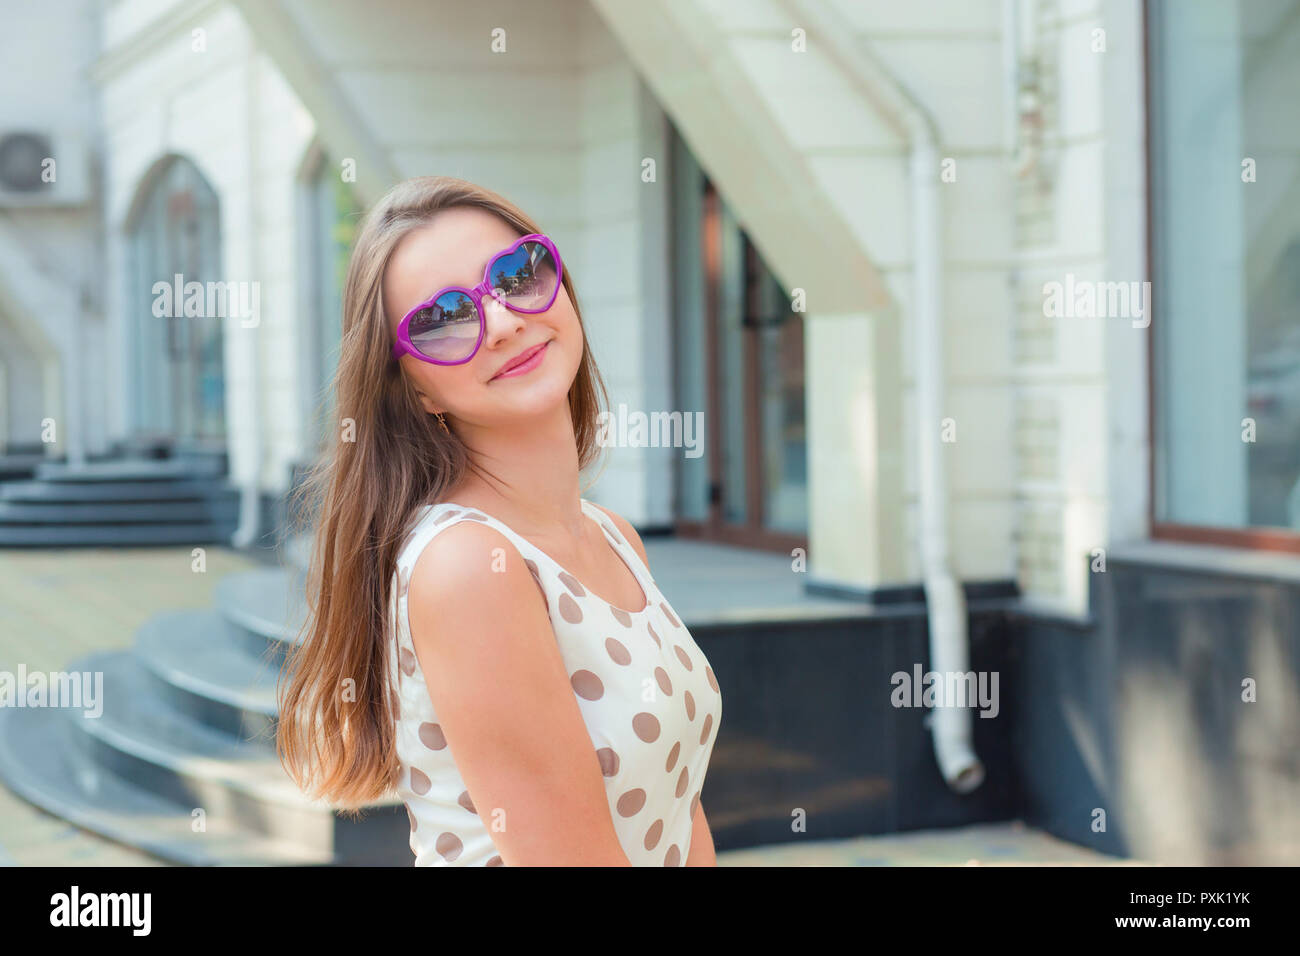 Teen girl with heart-shaped sunglasses smiling Stock Photo - Alamy